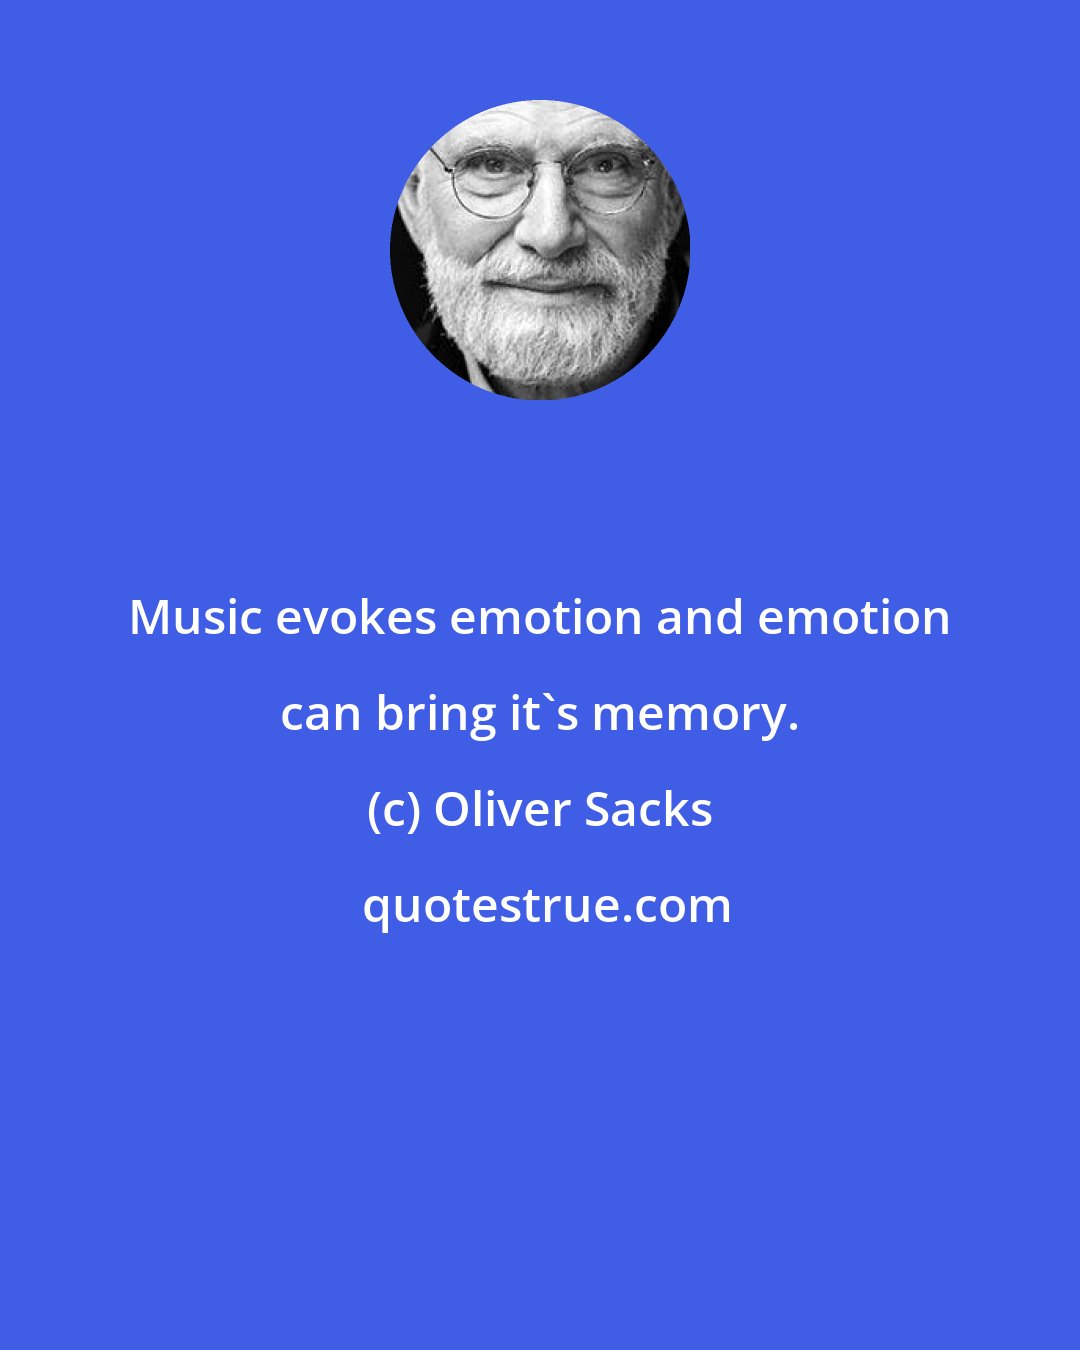 Oliver Sacks: Music evokes emotion and emotion can bring it's memory.